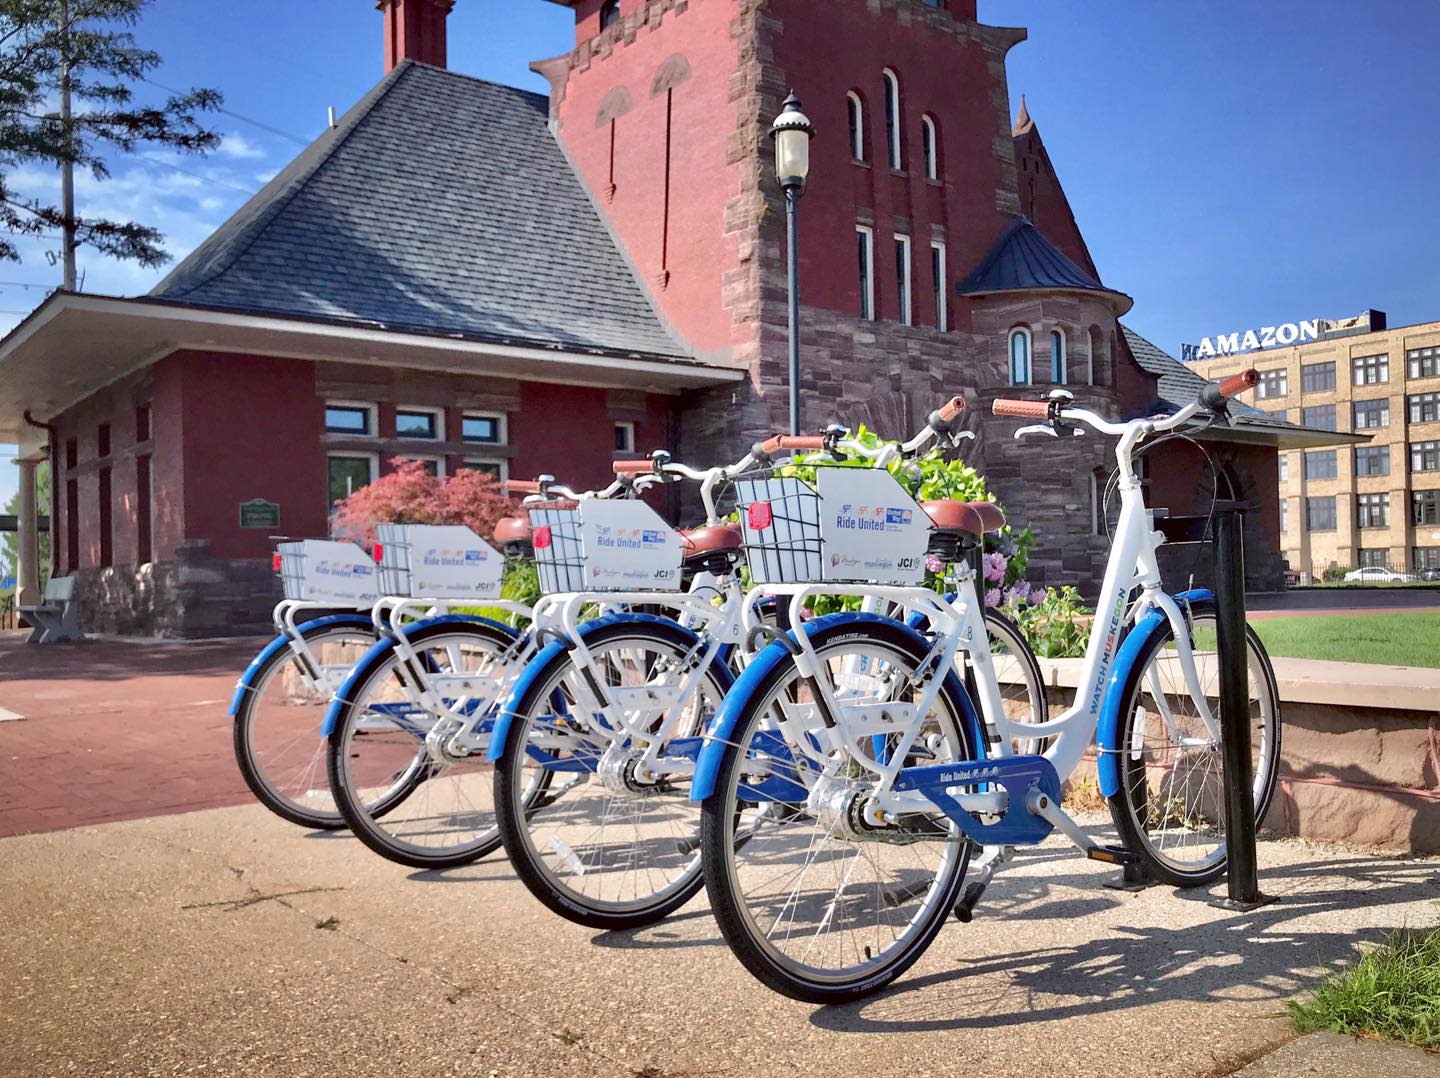 4 blue rental bikes lined up at bike rack in front of historic red brick building